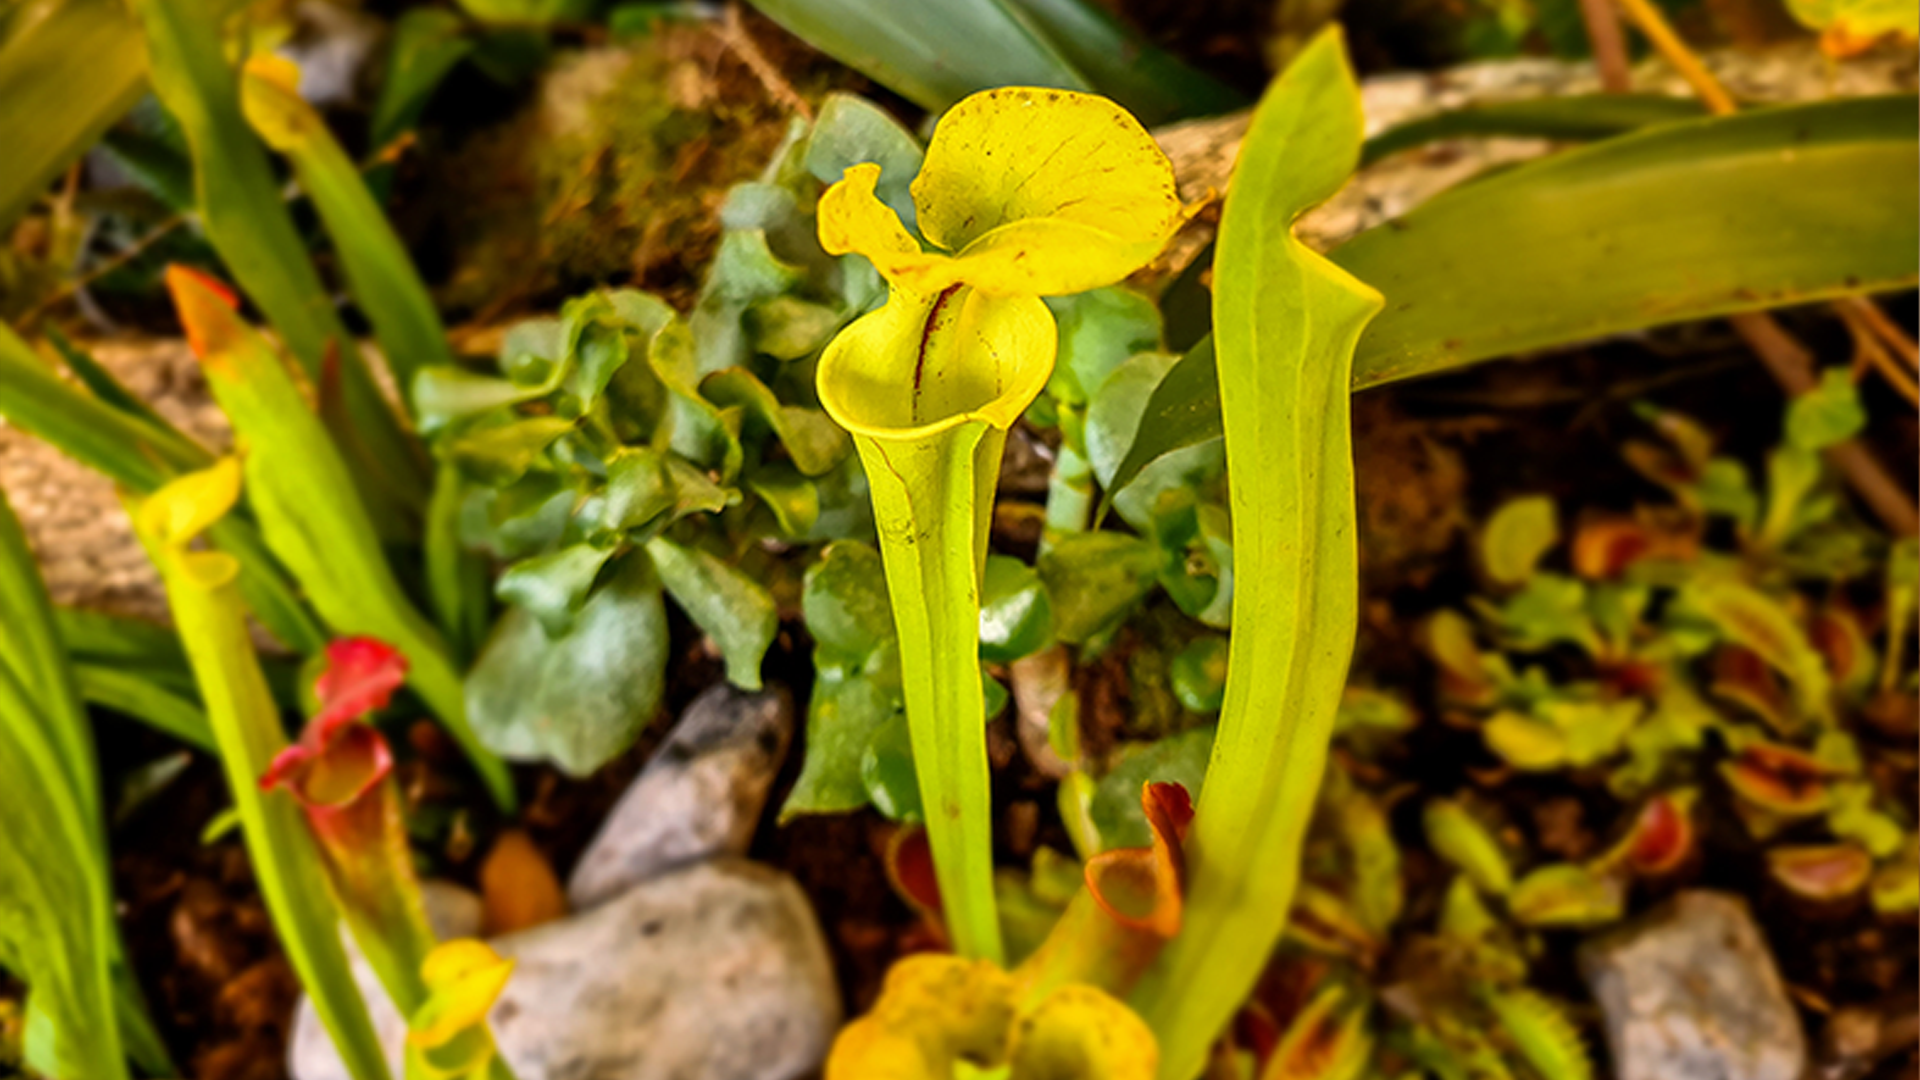 2 long, yellow pitcher shaped plants amongst other plants